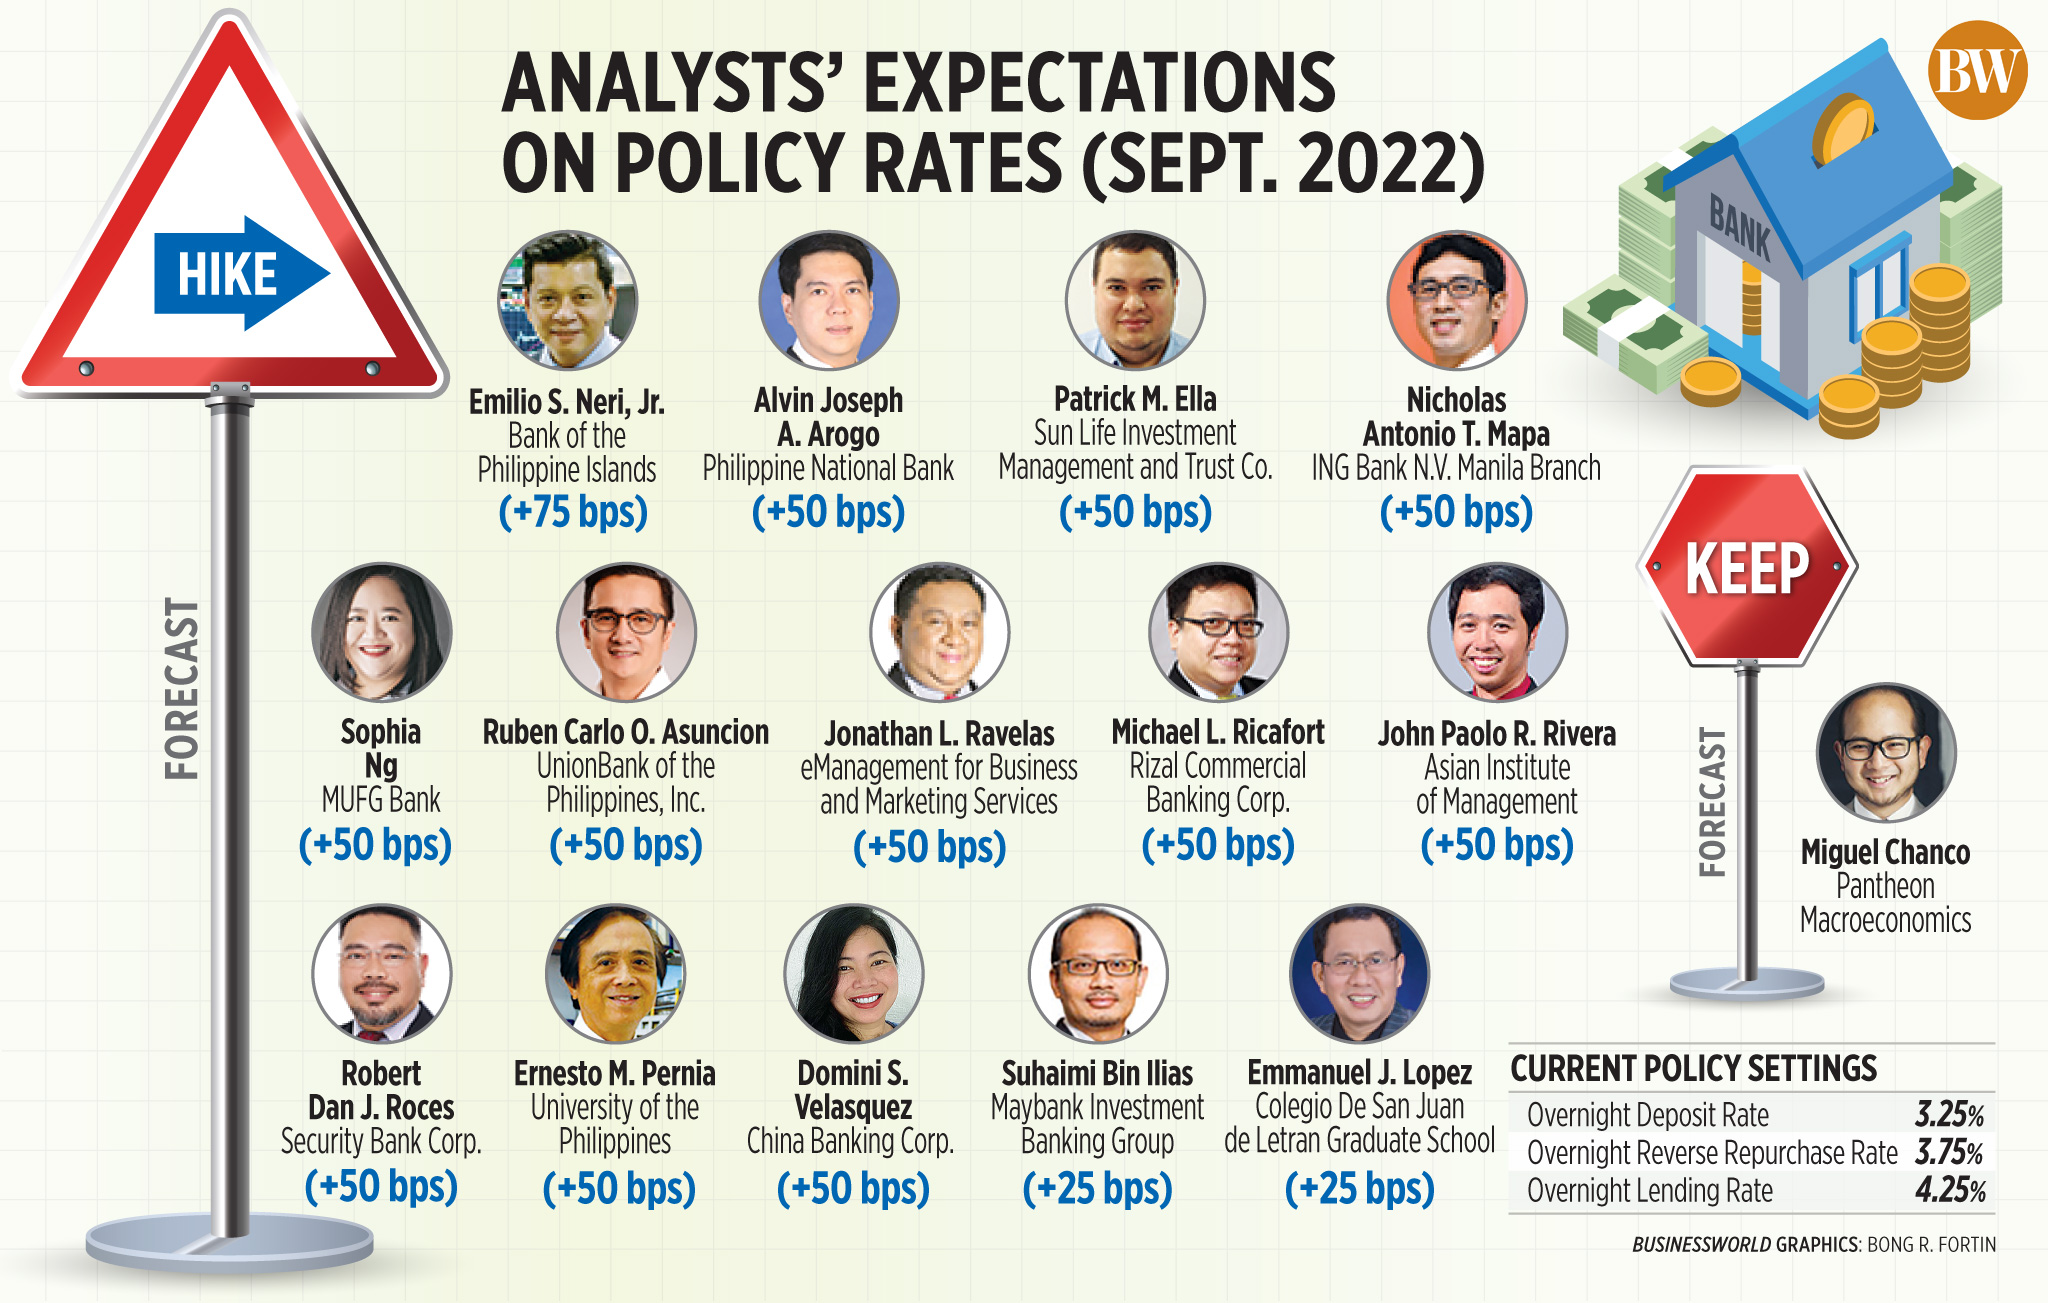 Analysts’ expectations on policy rates (Sept. 2022)